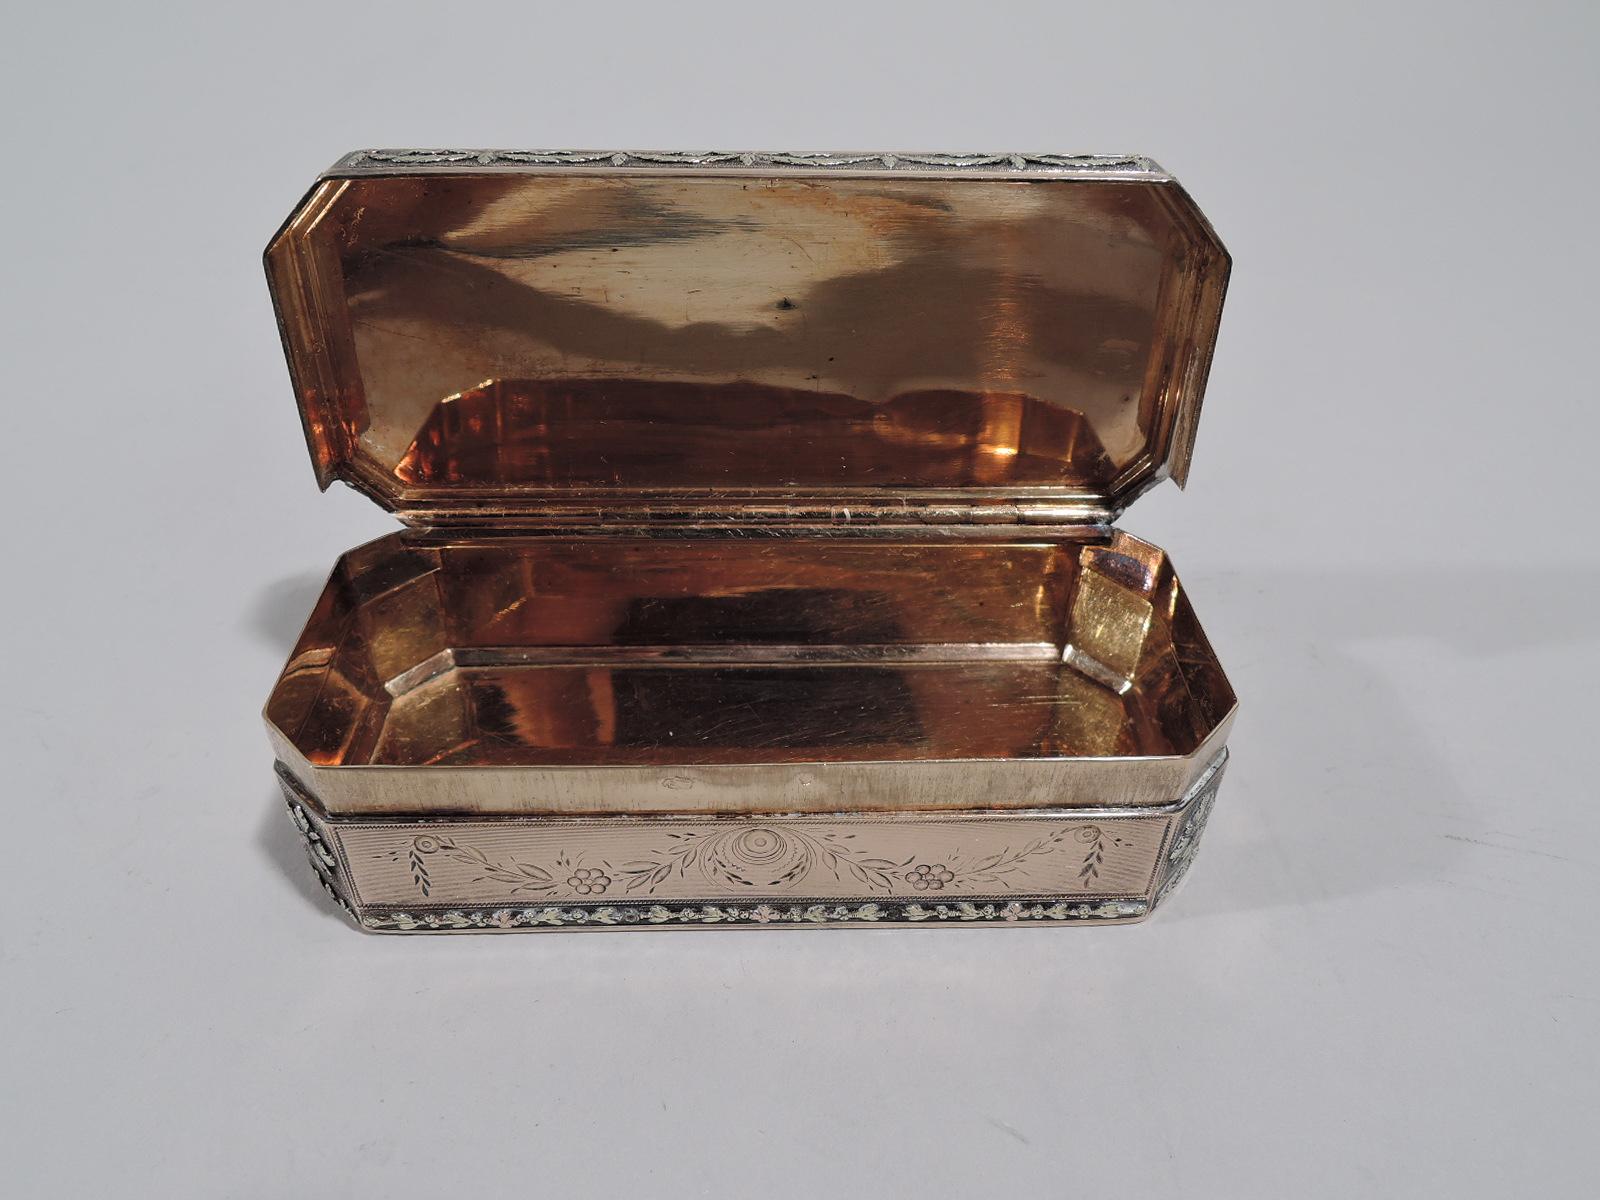 Antique French Neoclassical 18 Karat Gold Snuffbox with Bright-Cut Ornament 3